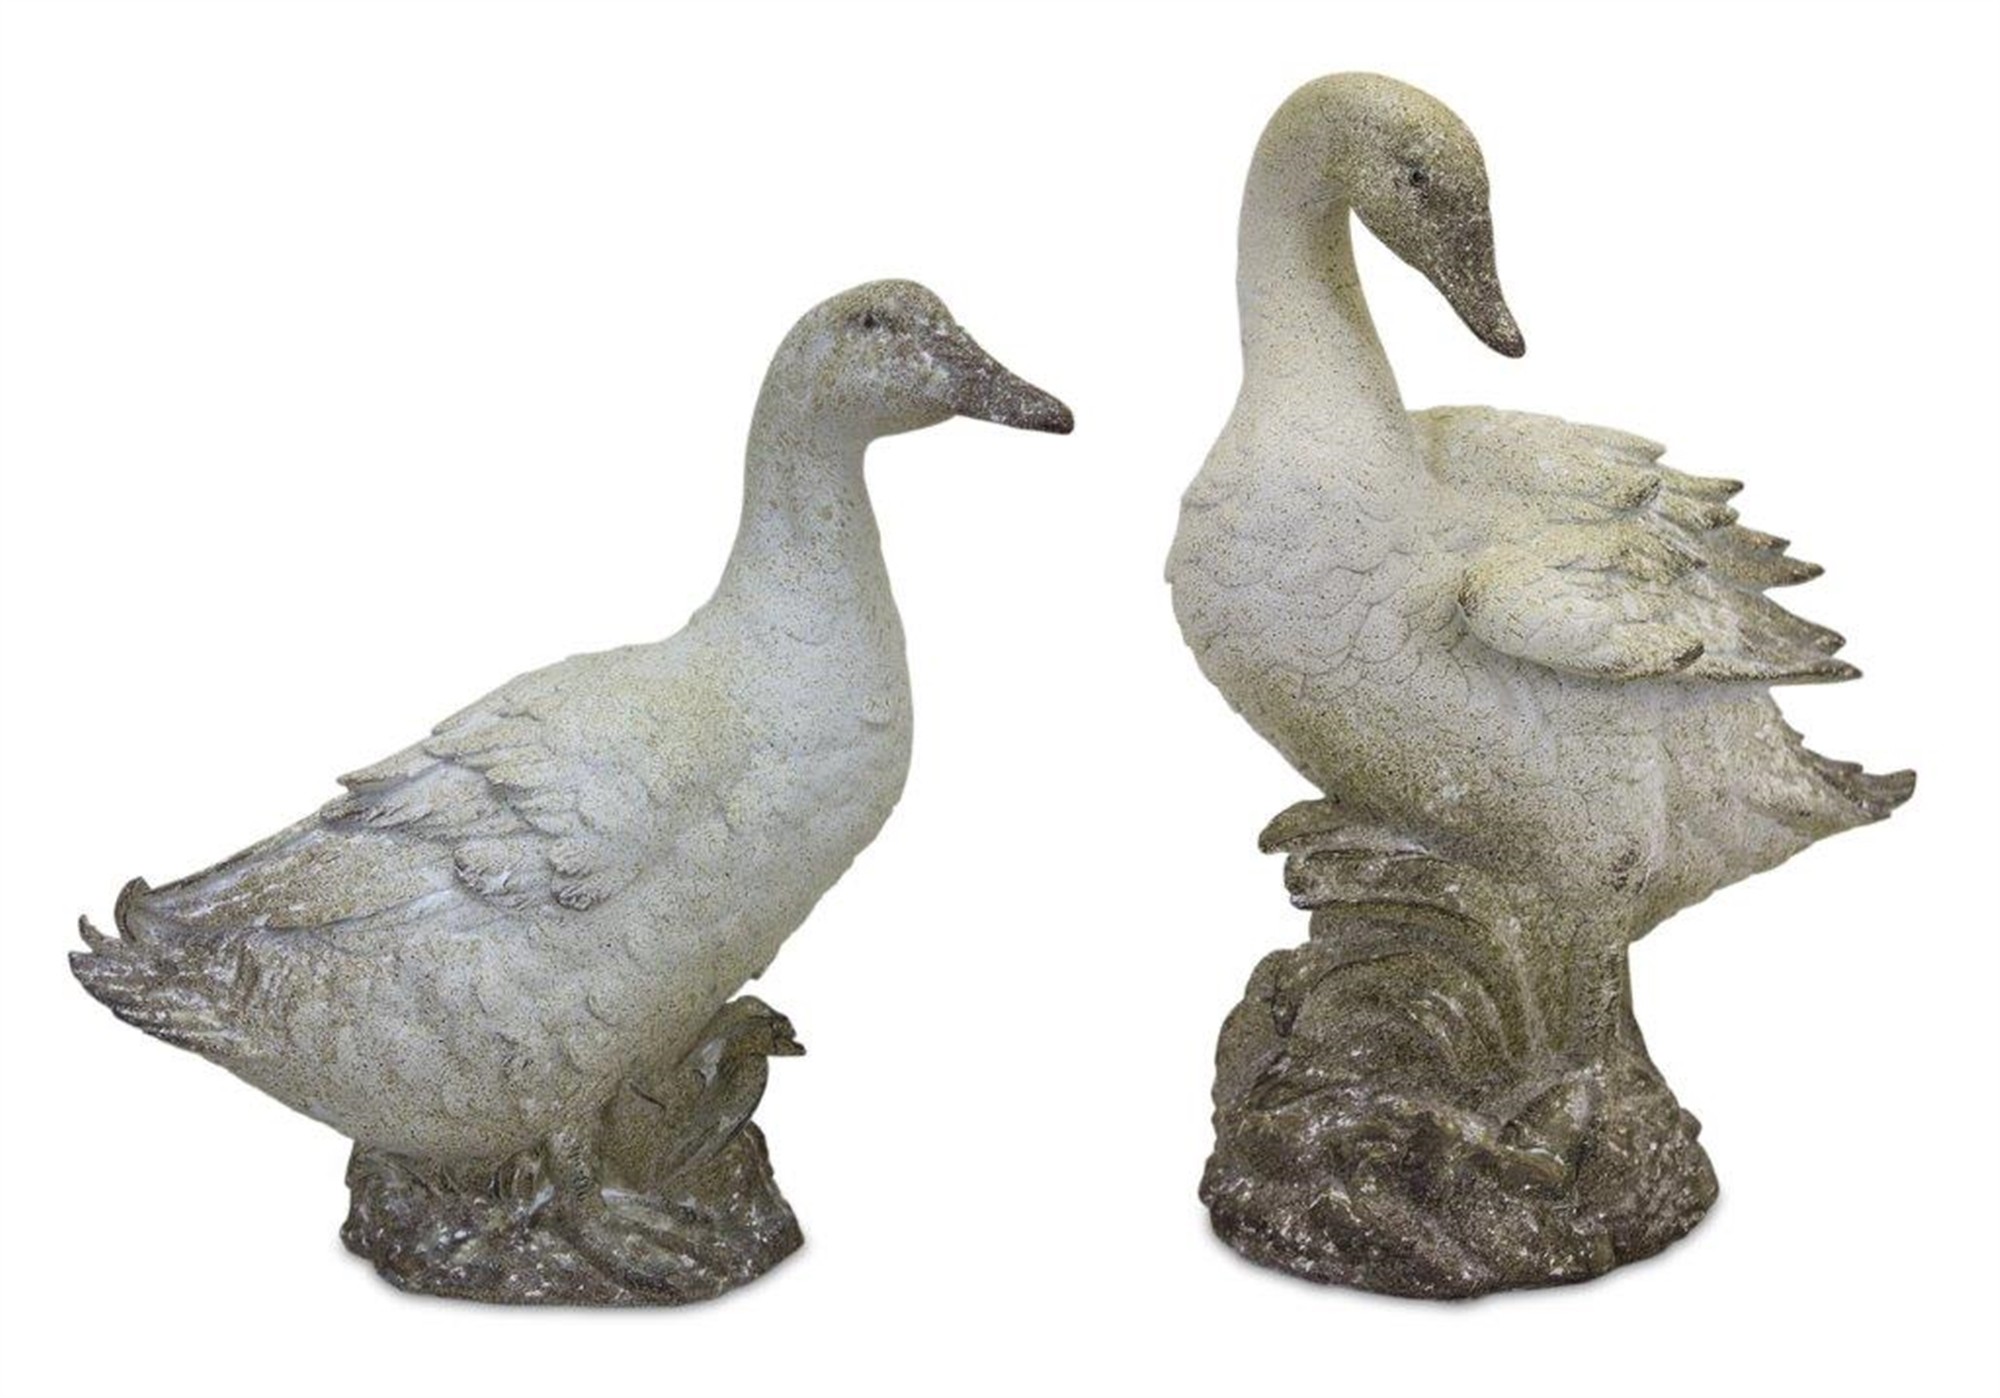 Duck (Set of 2) 9.5"H, 10.5"H Resin